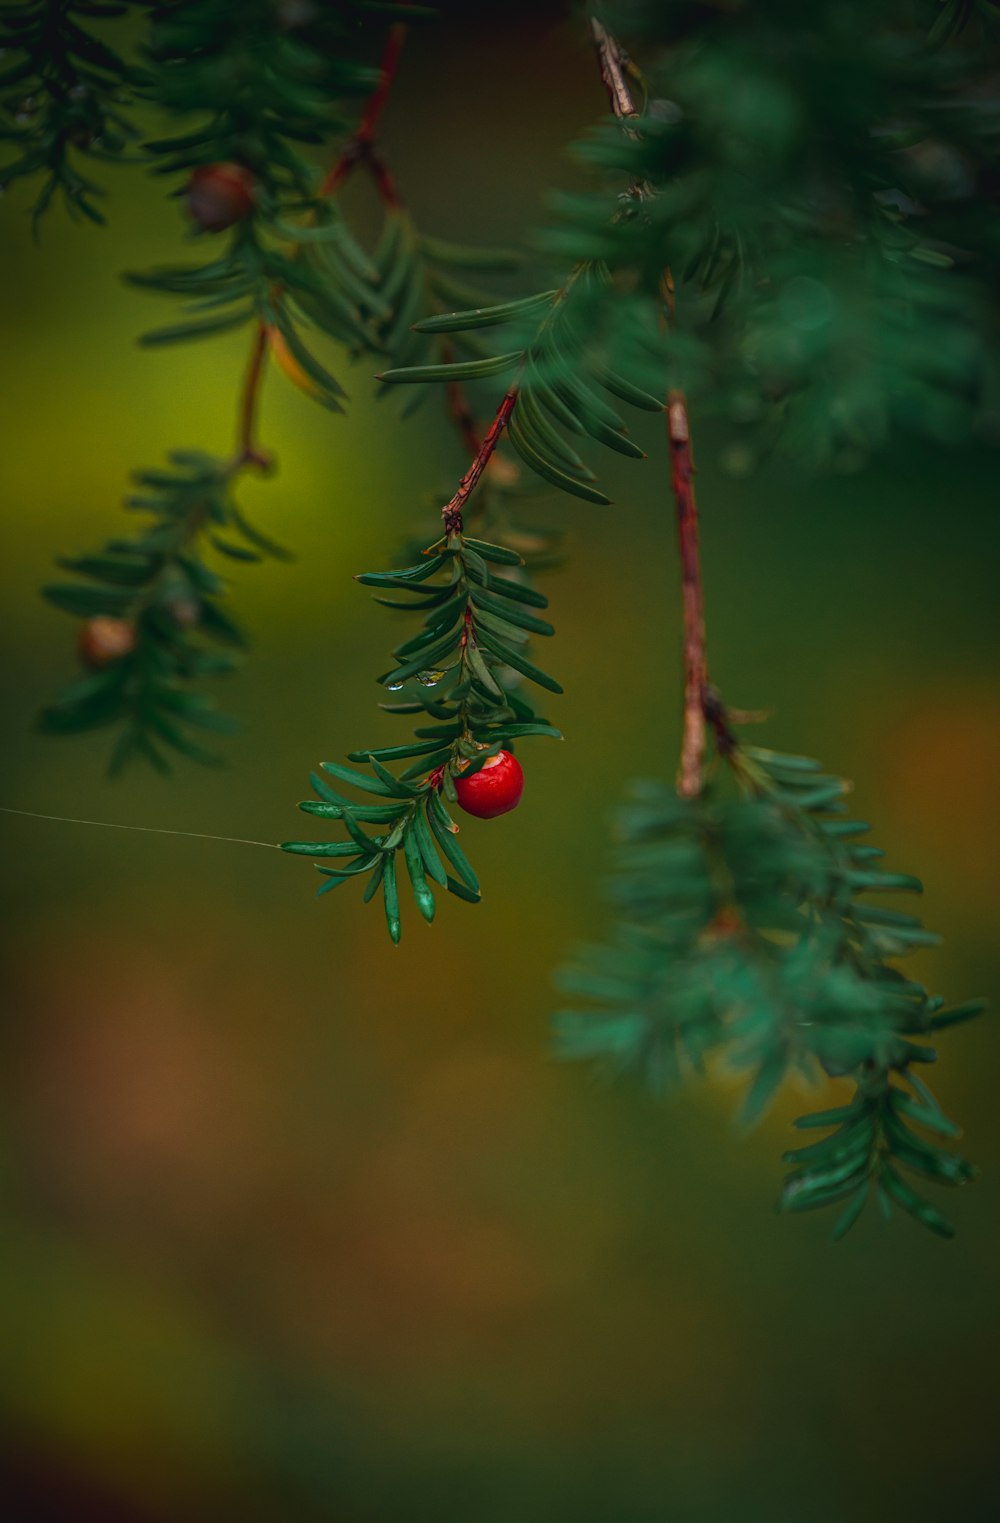 a branch of a pine tree with a red berry hanging from it